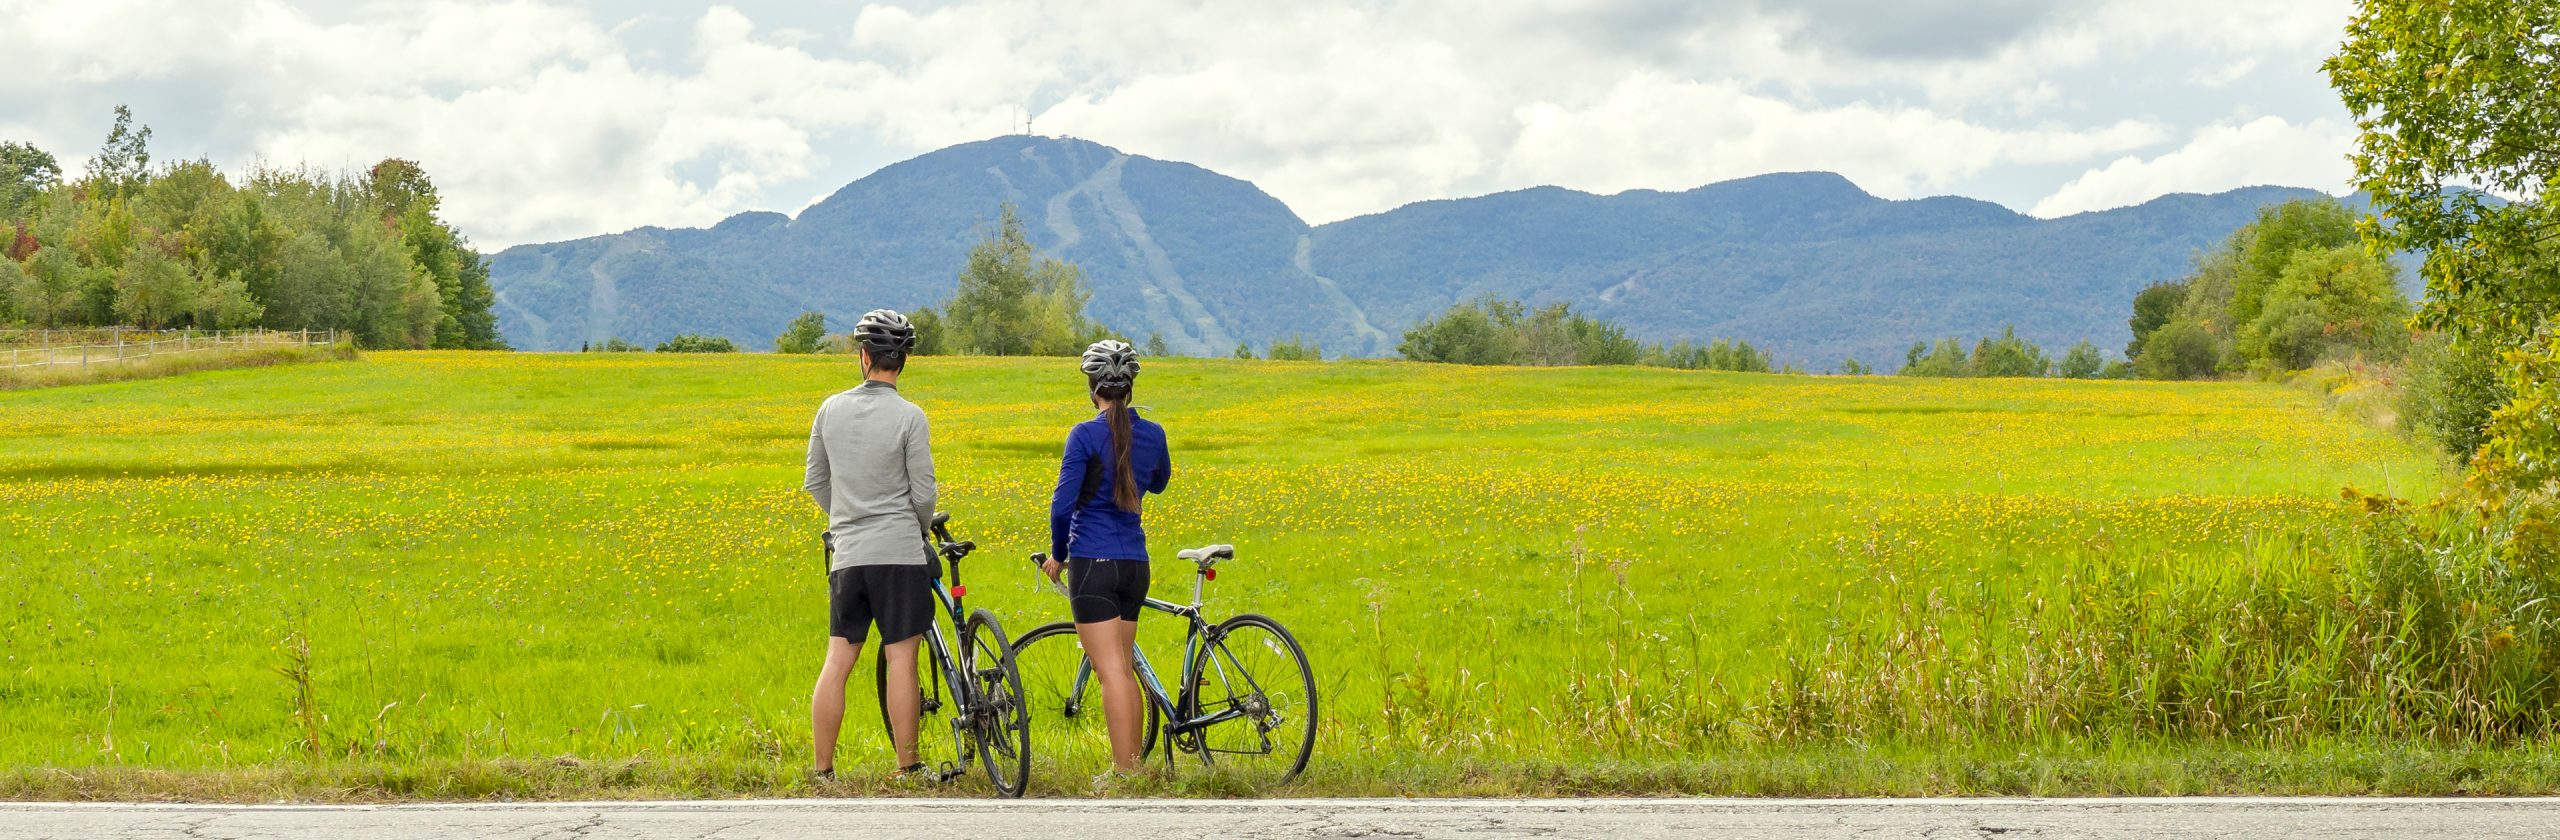 Eastern Townships Tour by bicycle